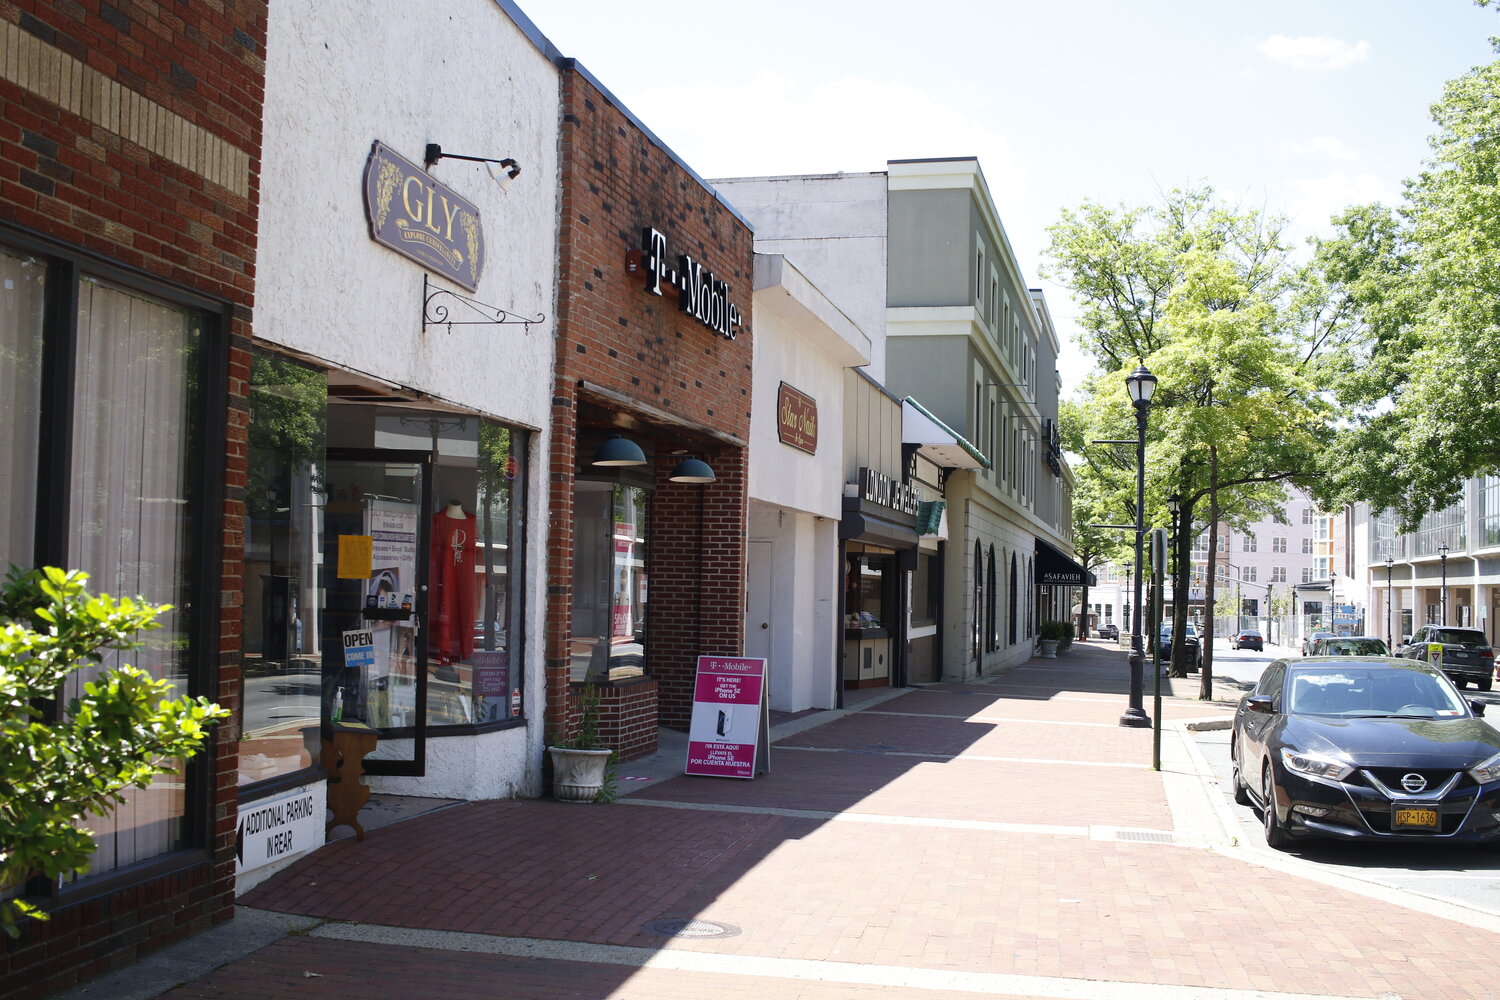 The City of Glen Cove is applying for a state Downtown Revitalization grant, which would help fund projects frequently requested by community members to improve the city’s downtown.